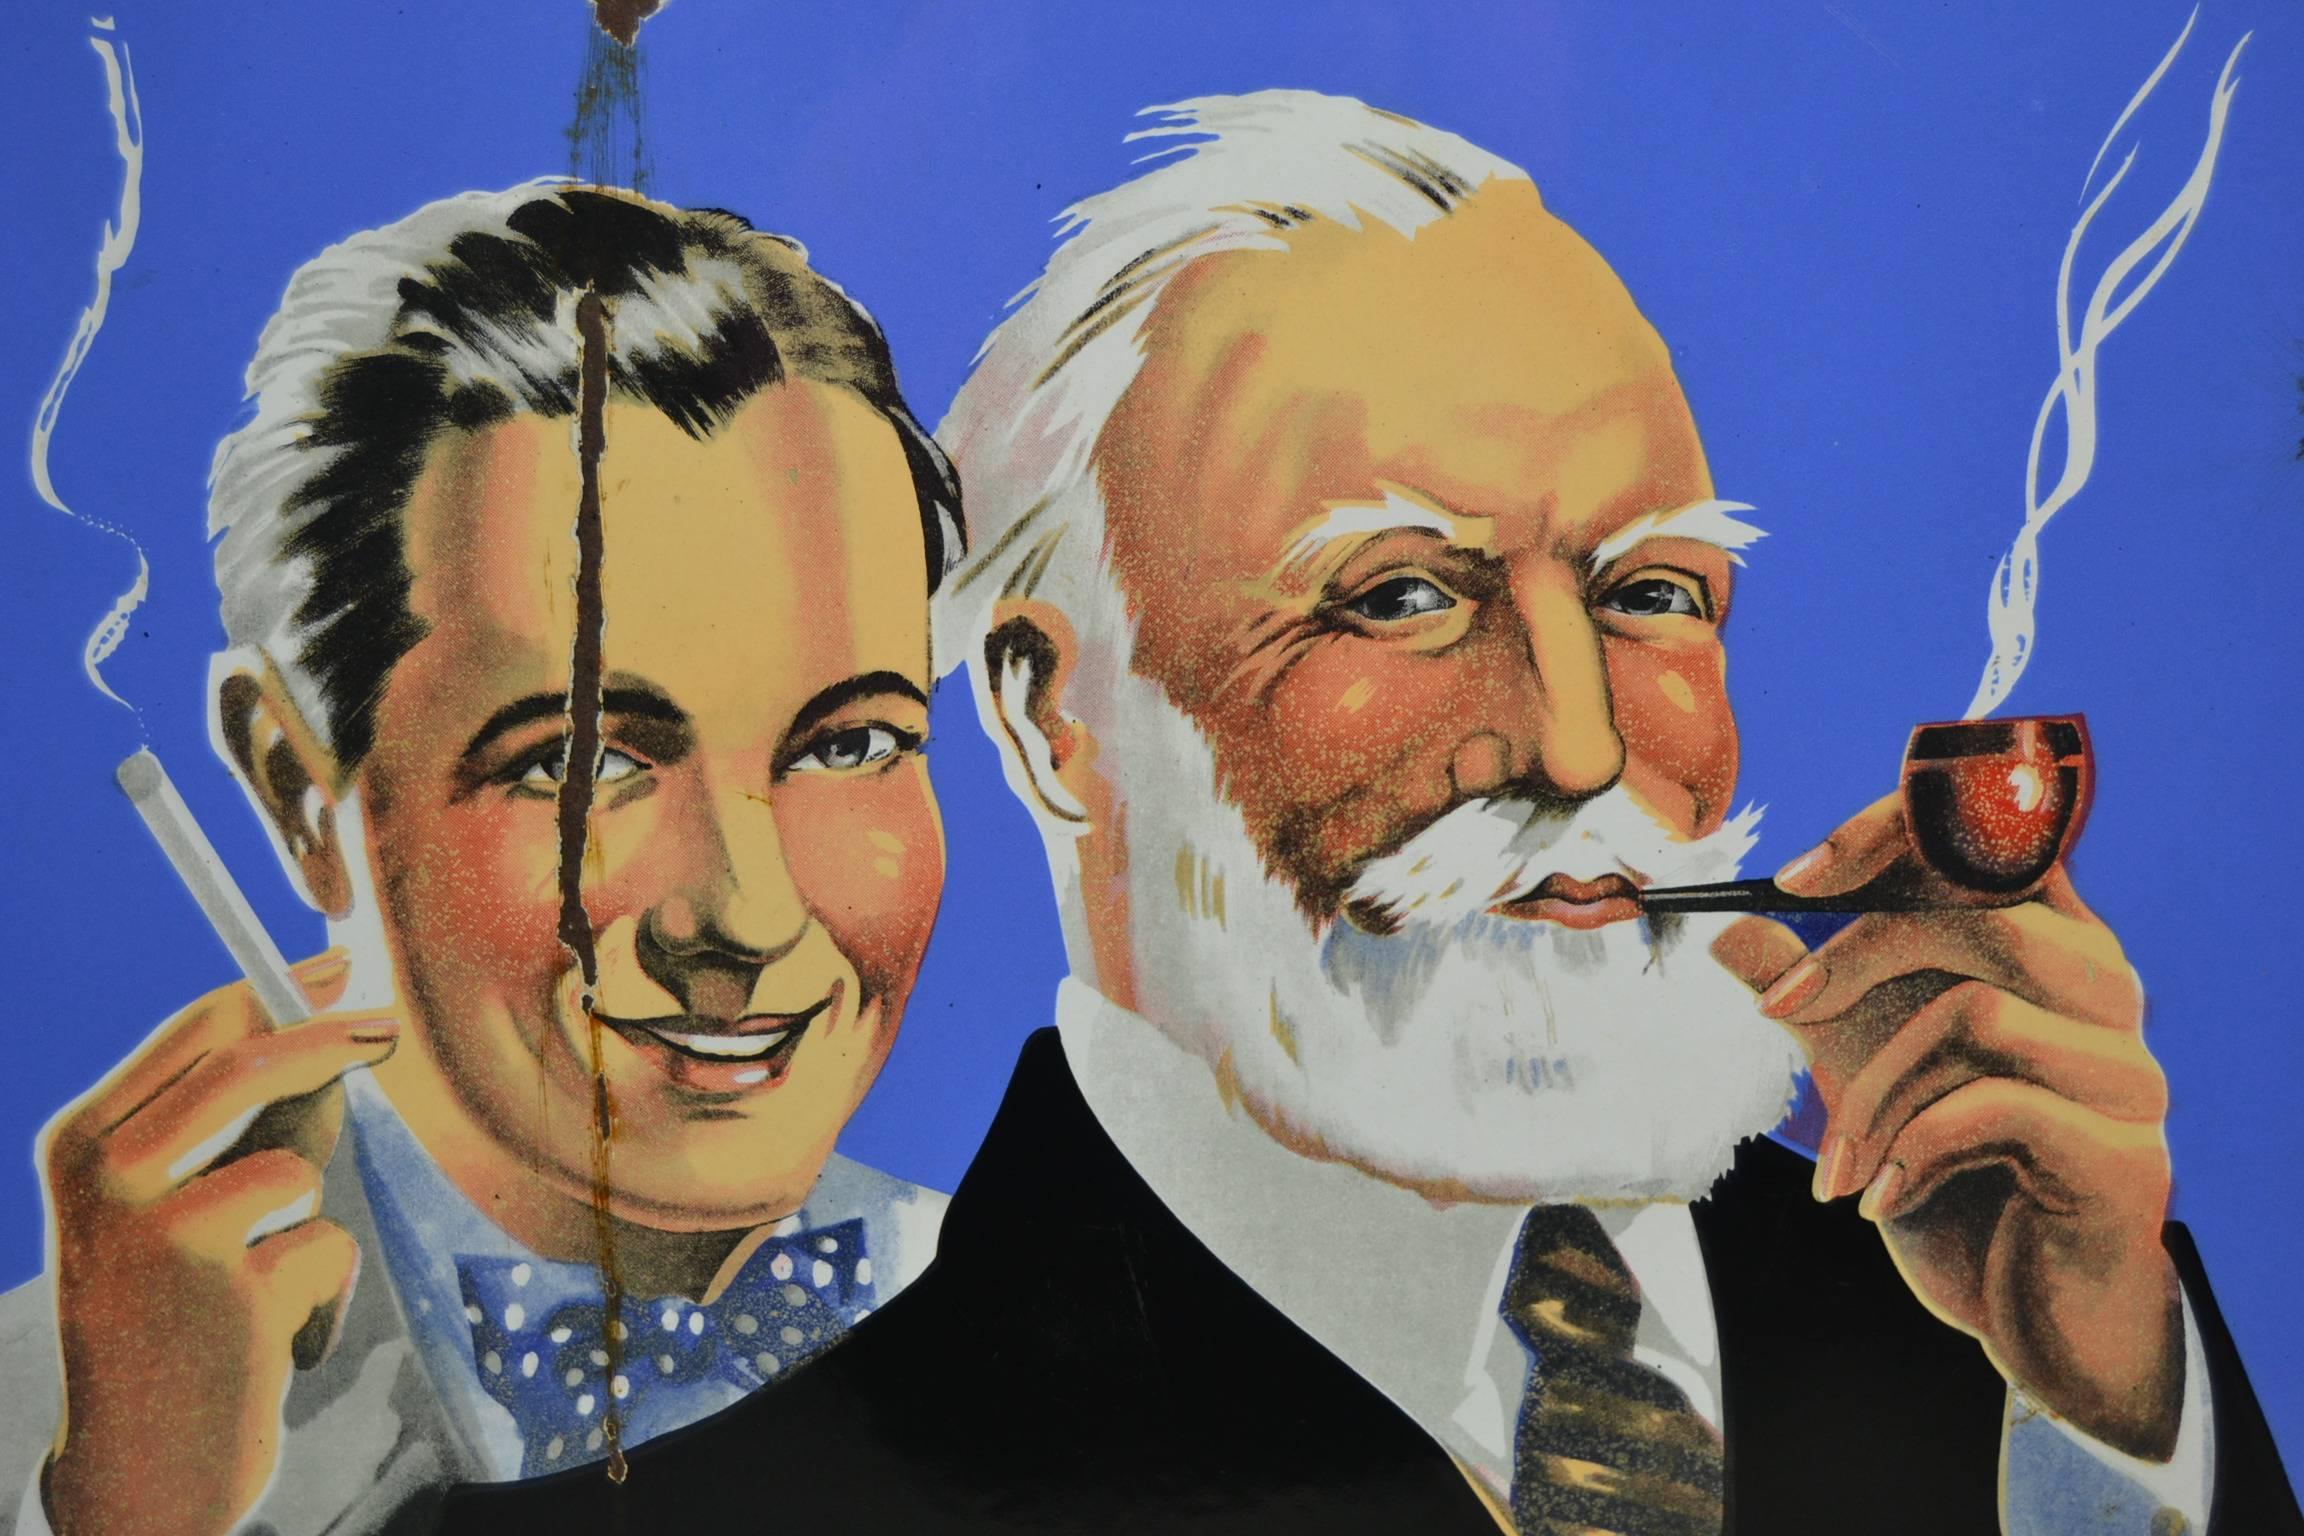 Vintage nice looking Enamel Advertising Sign for tobacco.
Beautiful design of two men smoking a sigaret and a pipe.
Ajja tobacco sign is dated  ( 1950 )  and made for the British American Tobacco Belgium Company Odon Warland.

